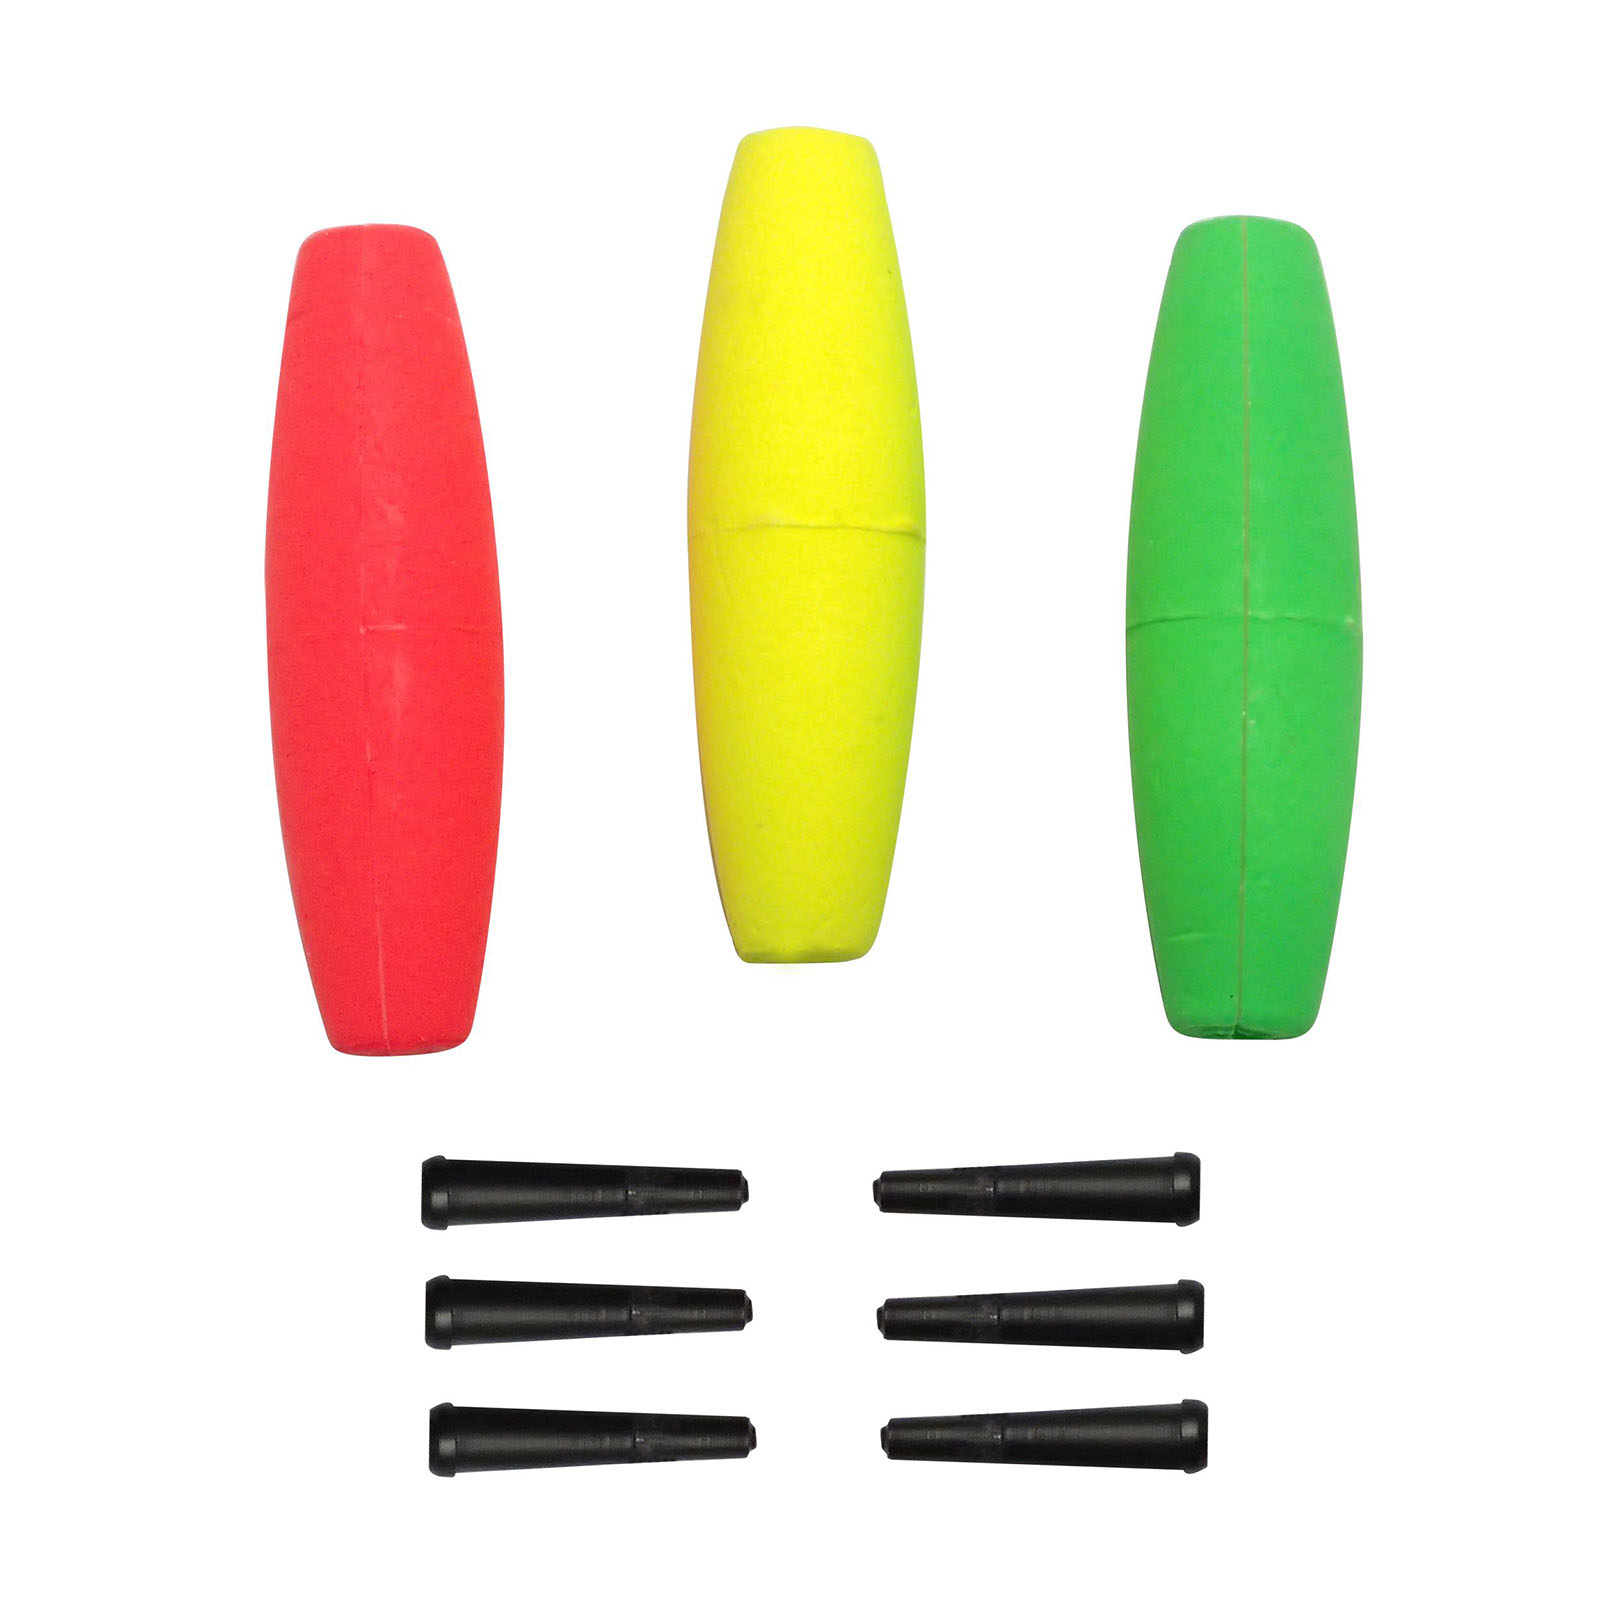  Leland 1 E Z Crappie/Trout slotted Floats - 4 pack Yellow &  green : Sports & Outdoors